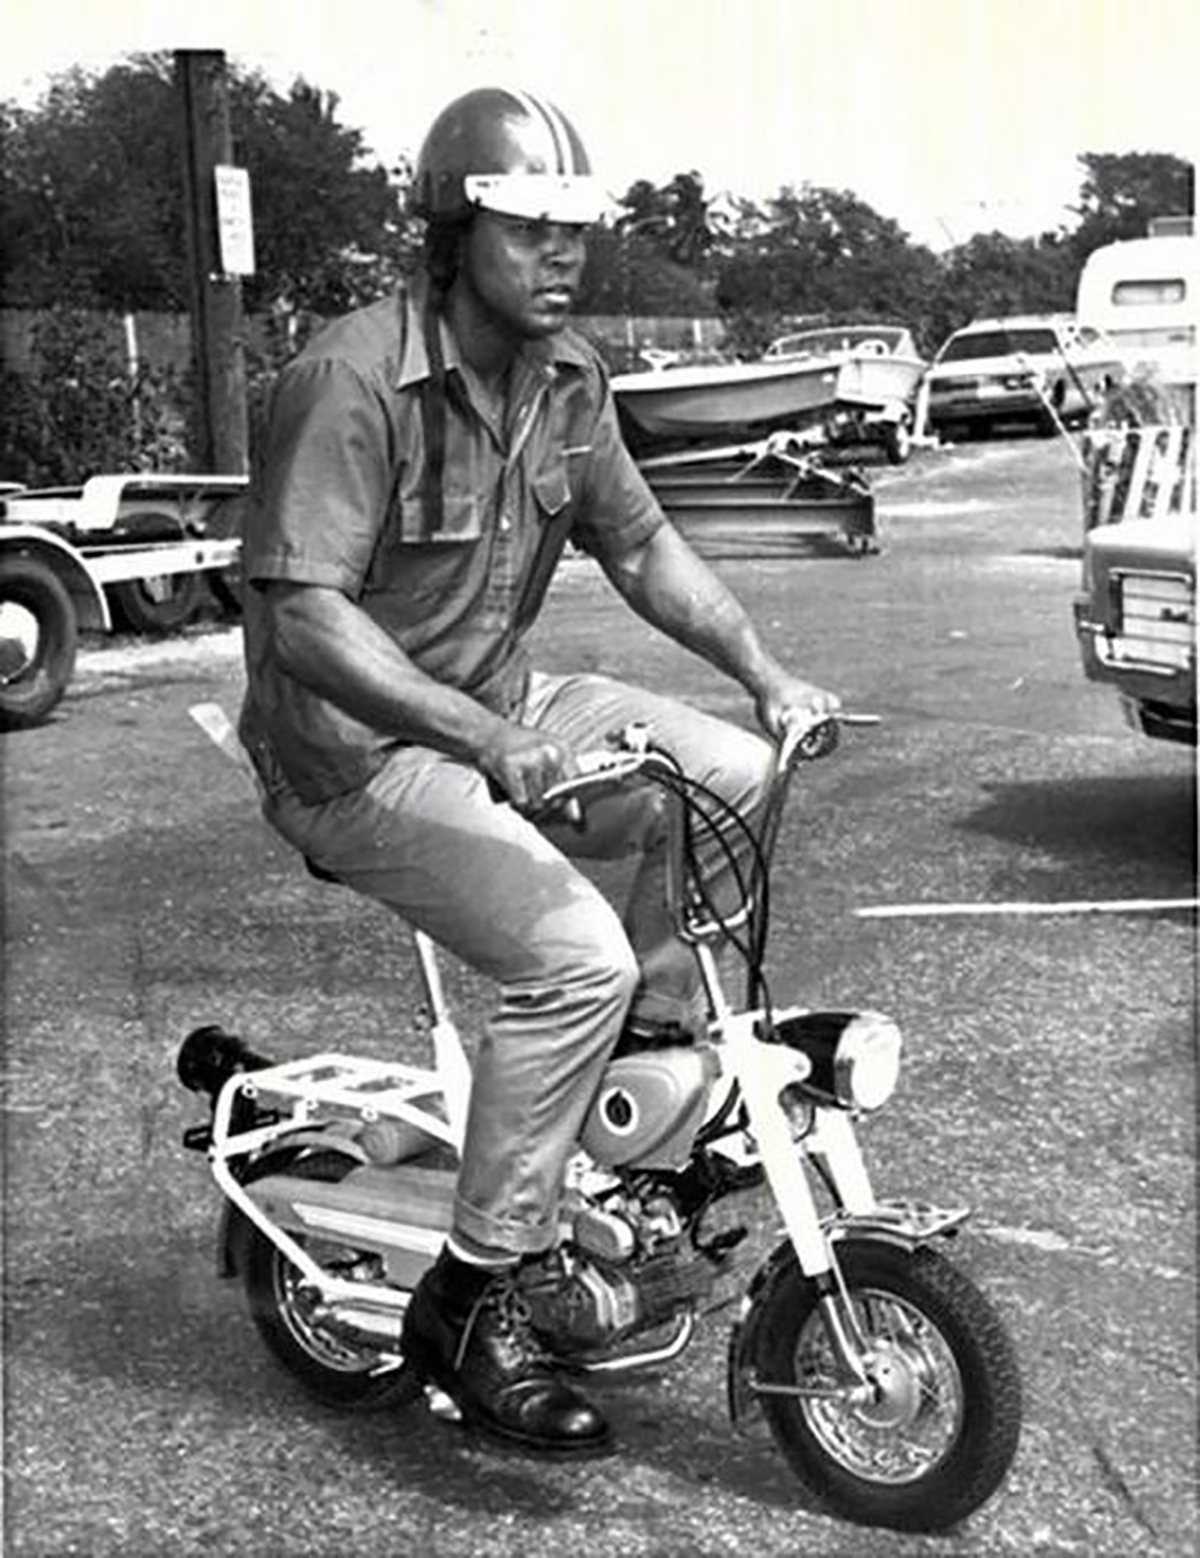 Cassius Clay riding a small scooter in the 60s.